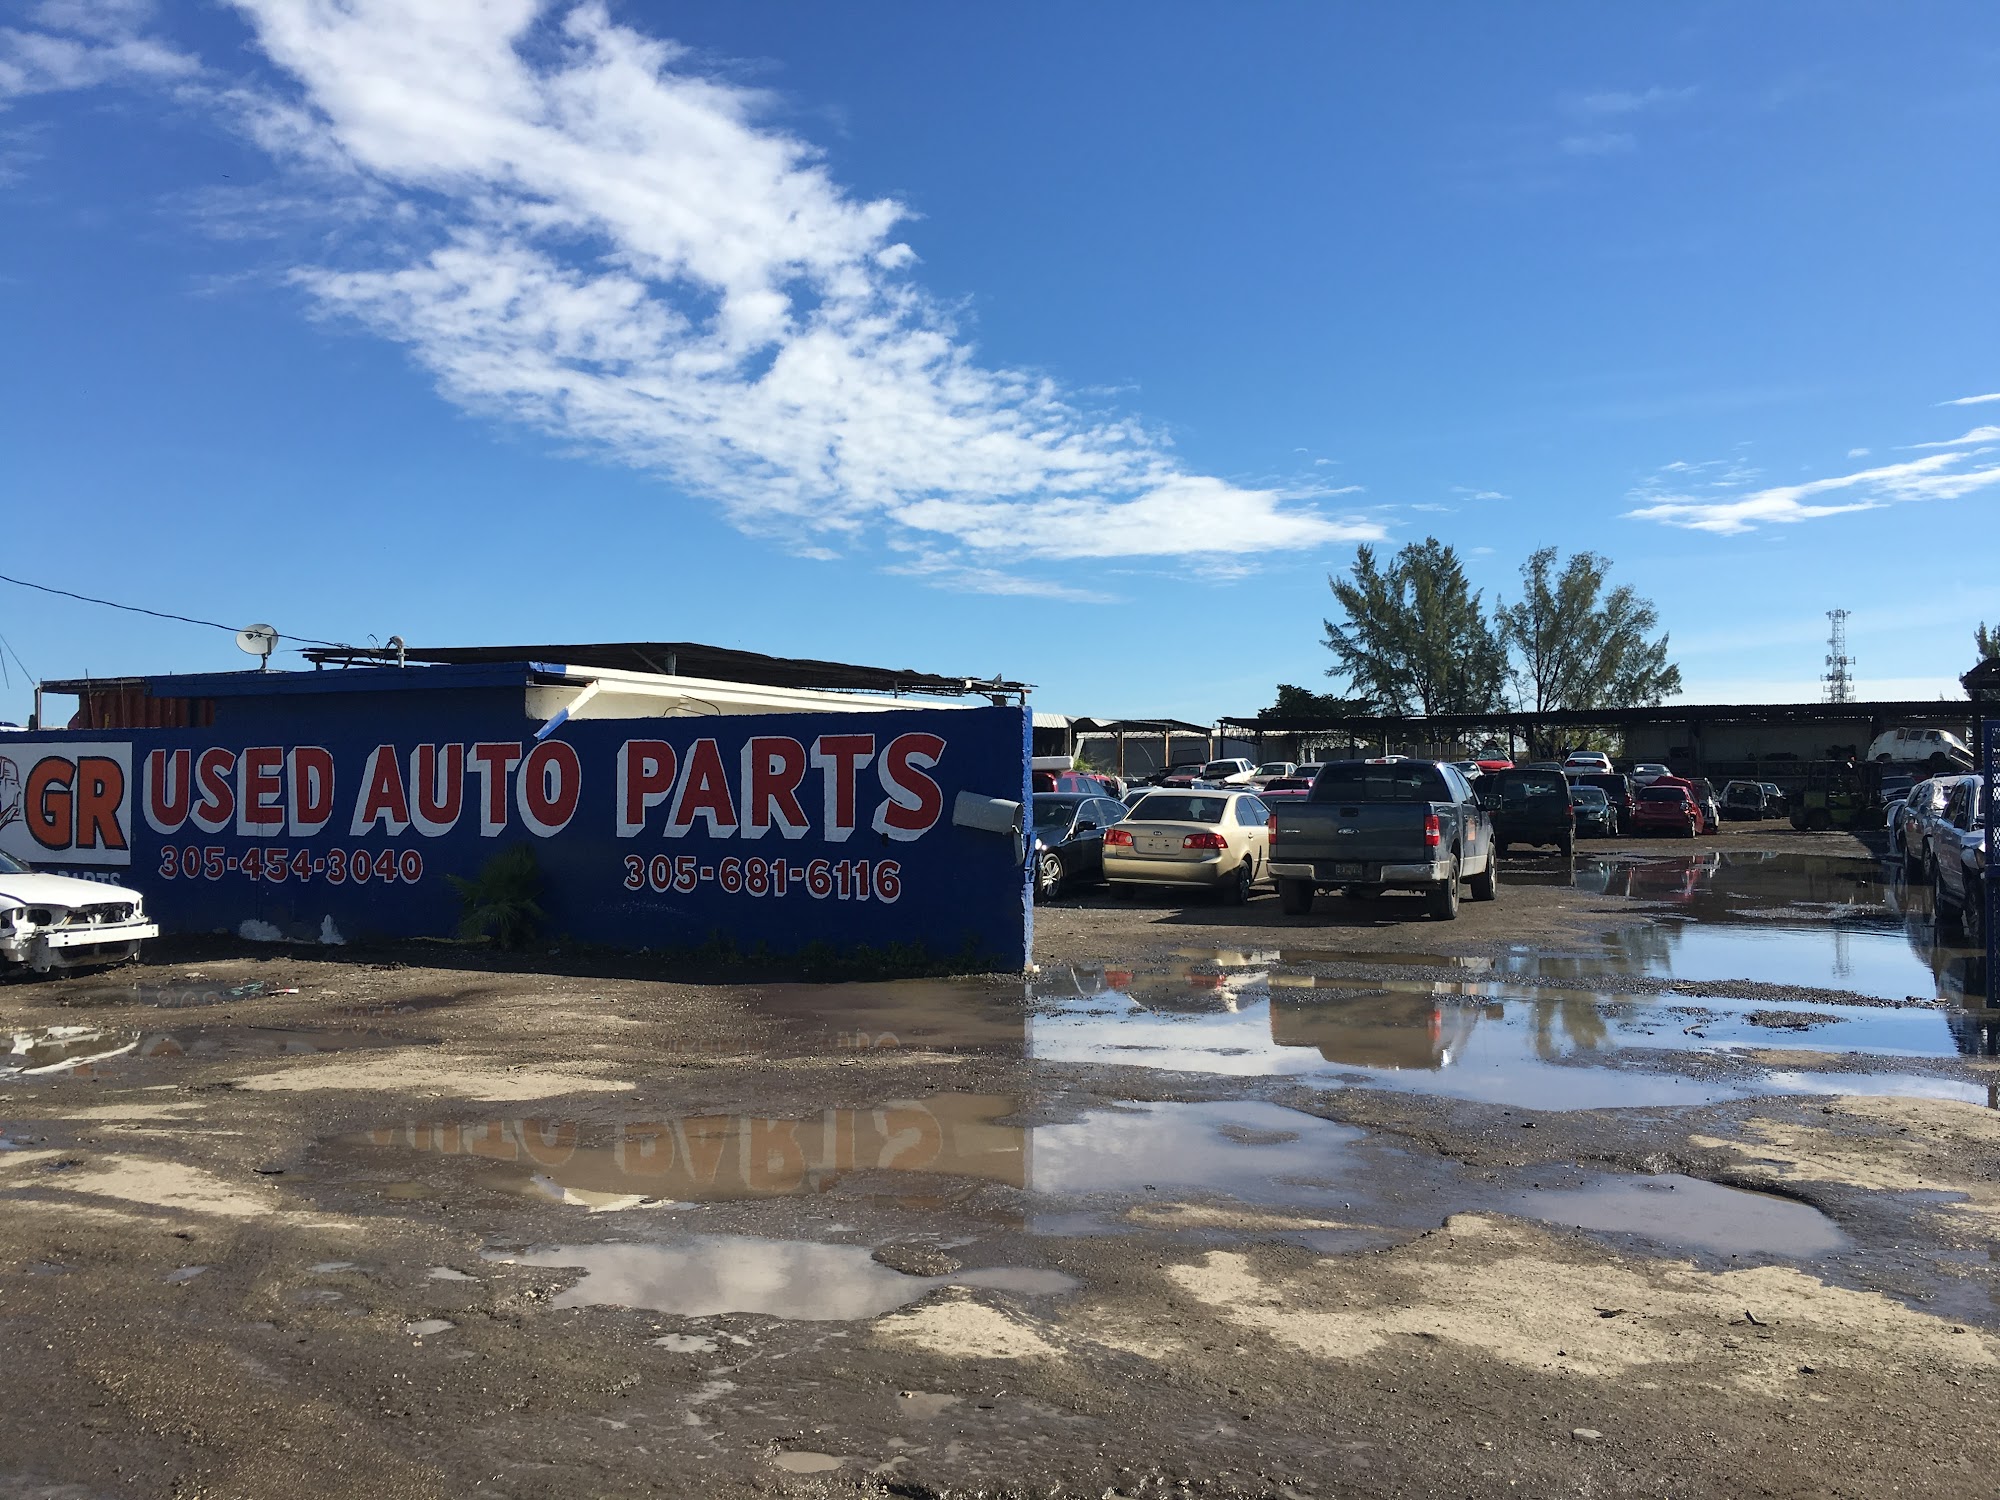 gr used auto parts